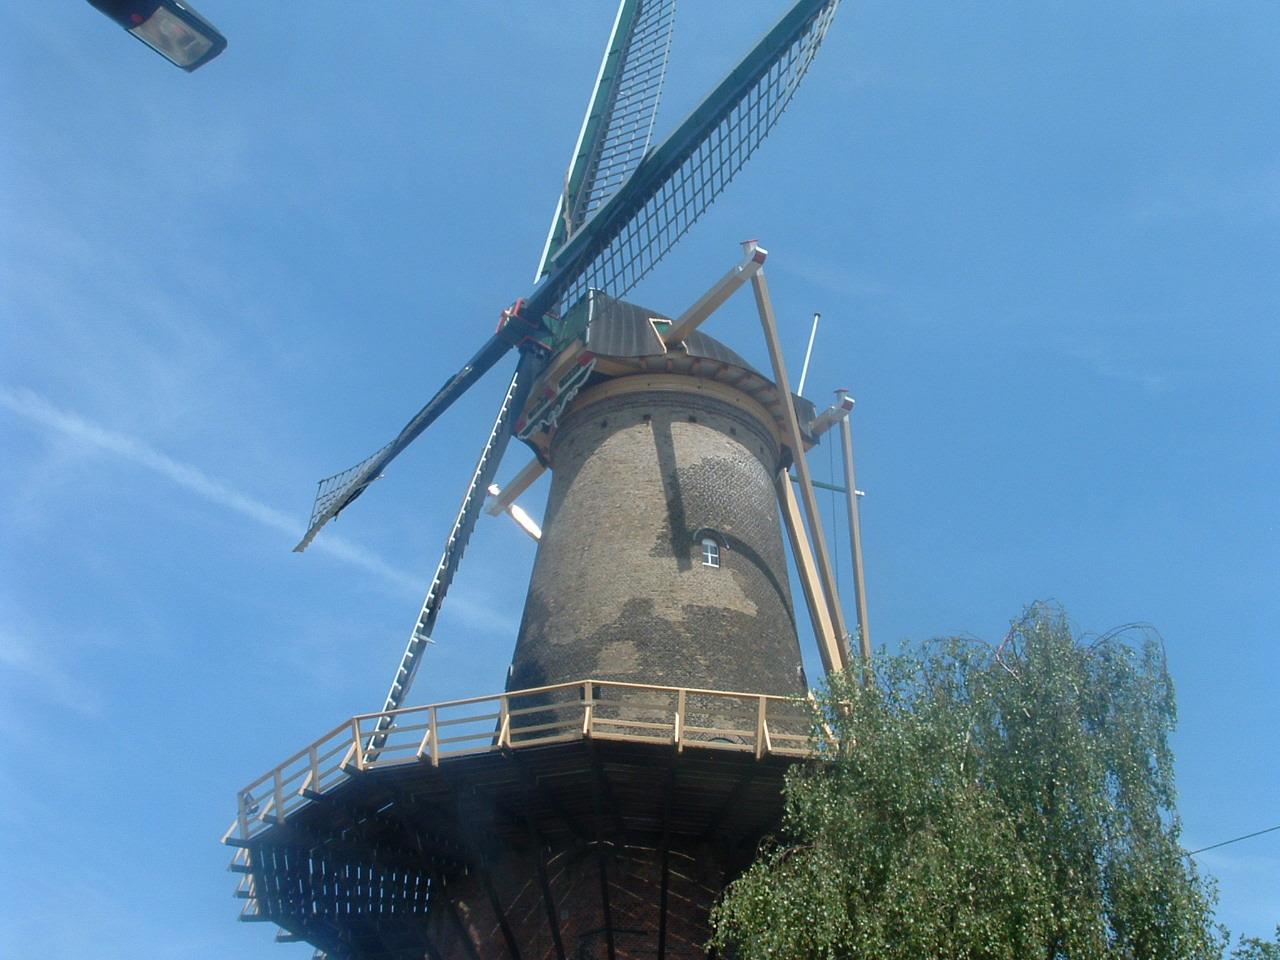 The Netherlands - Delft Windmill #2